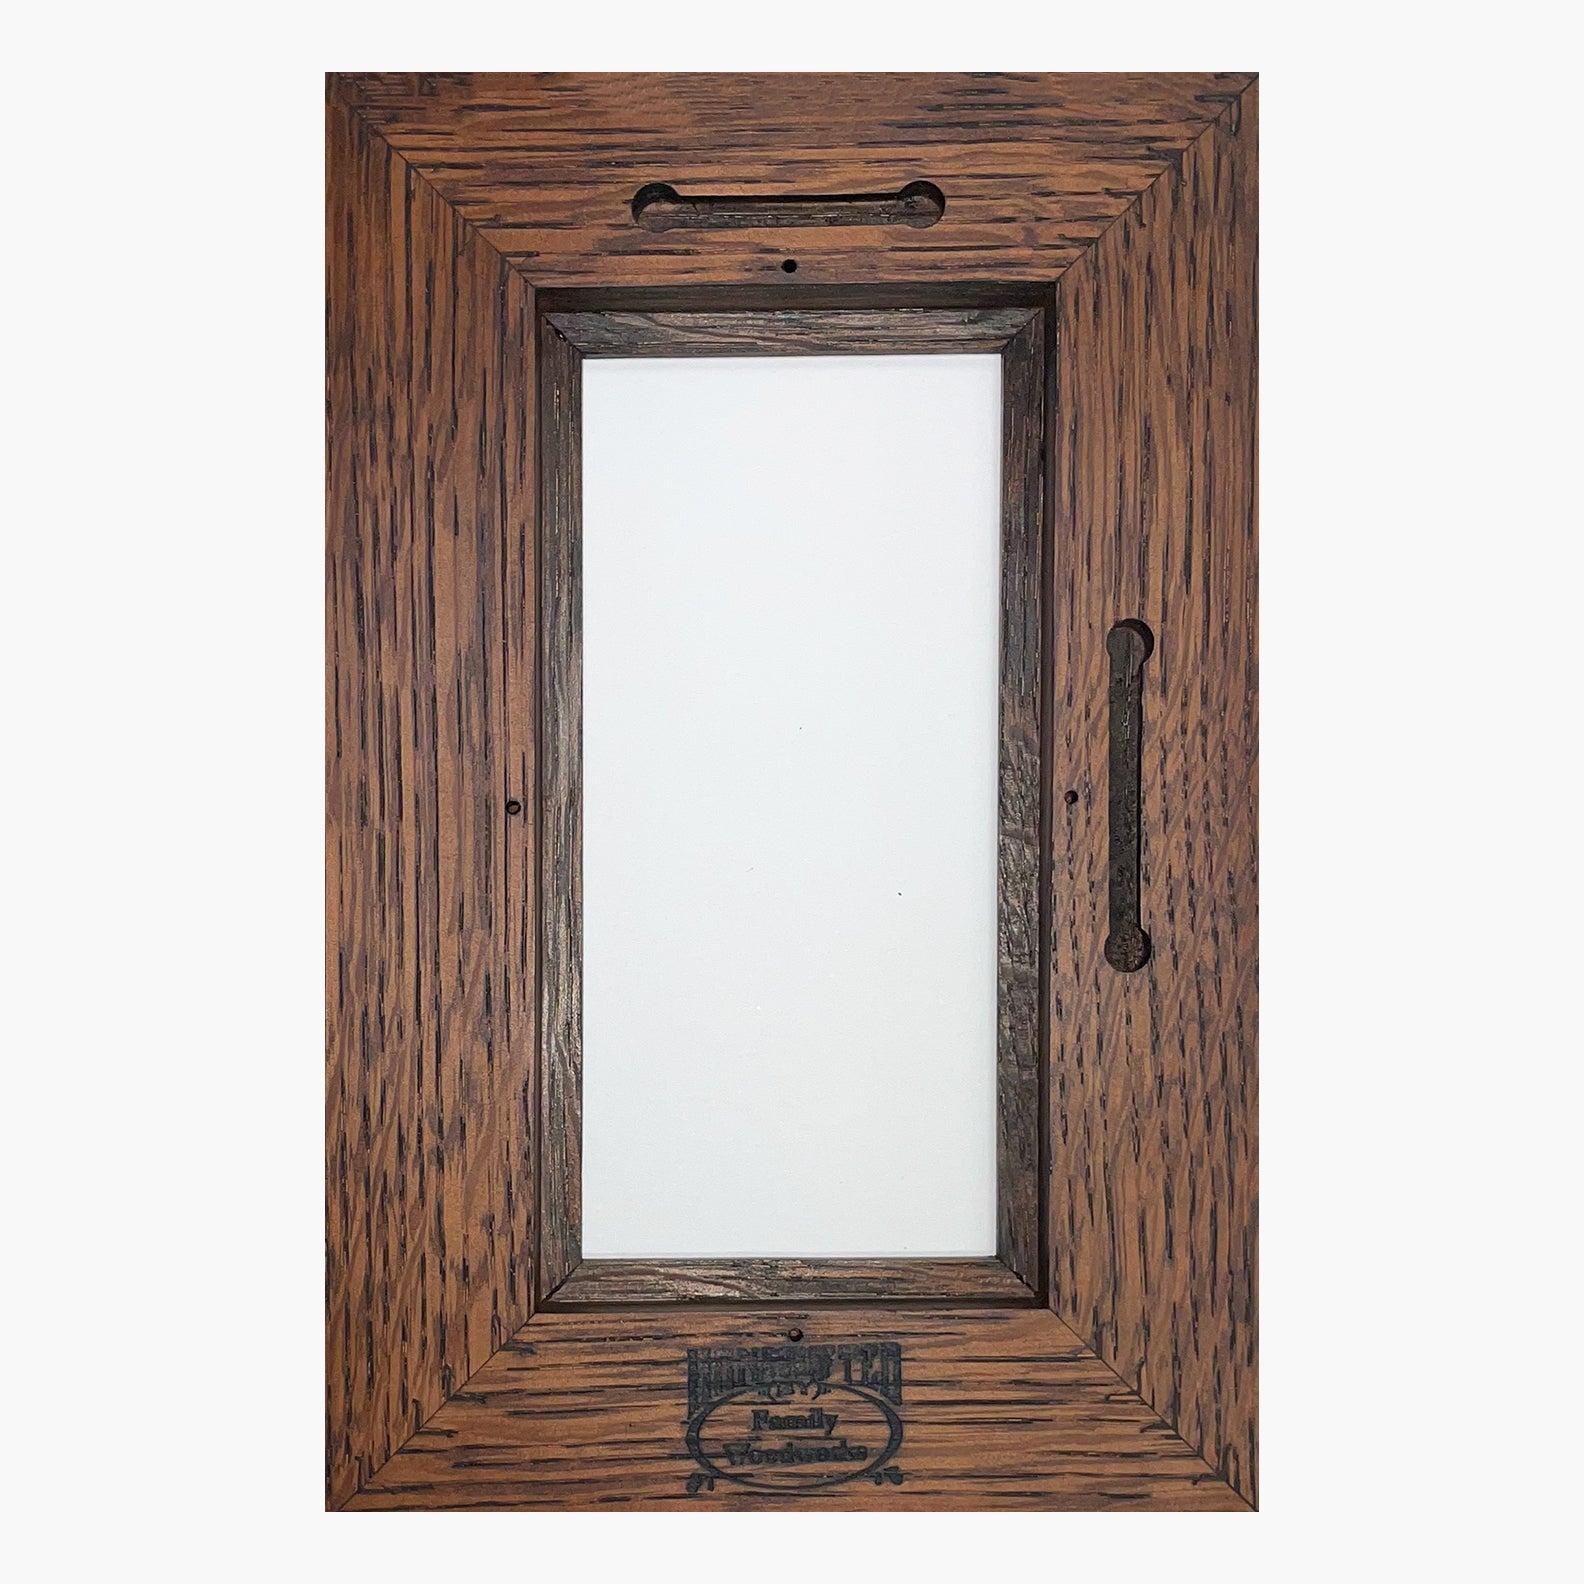 Quarter-sawn oak frame handmade by Family Woodworks.   A museum quality Arts and Crafts style frame for art tiles, pictures and/or paintings.